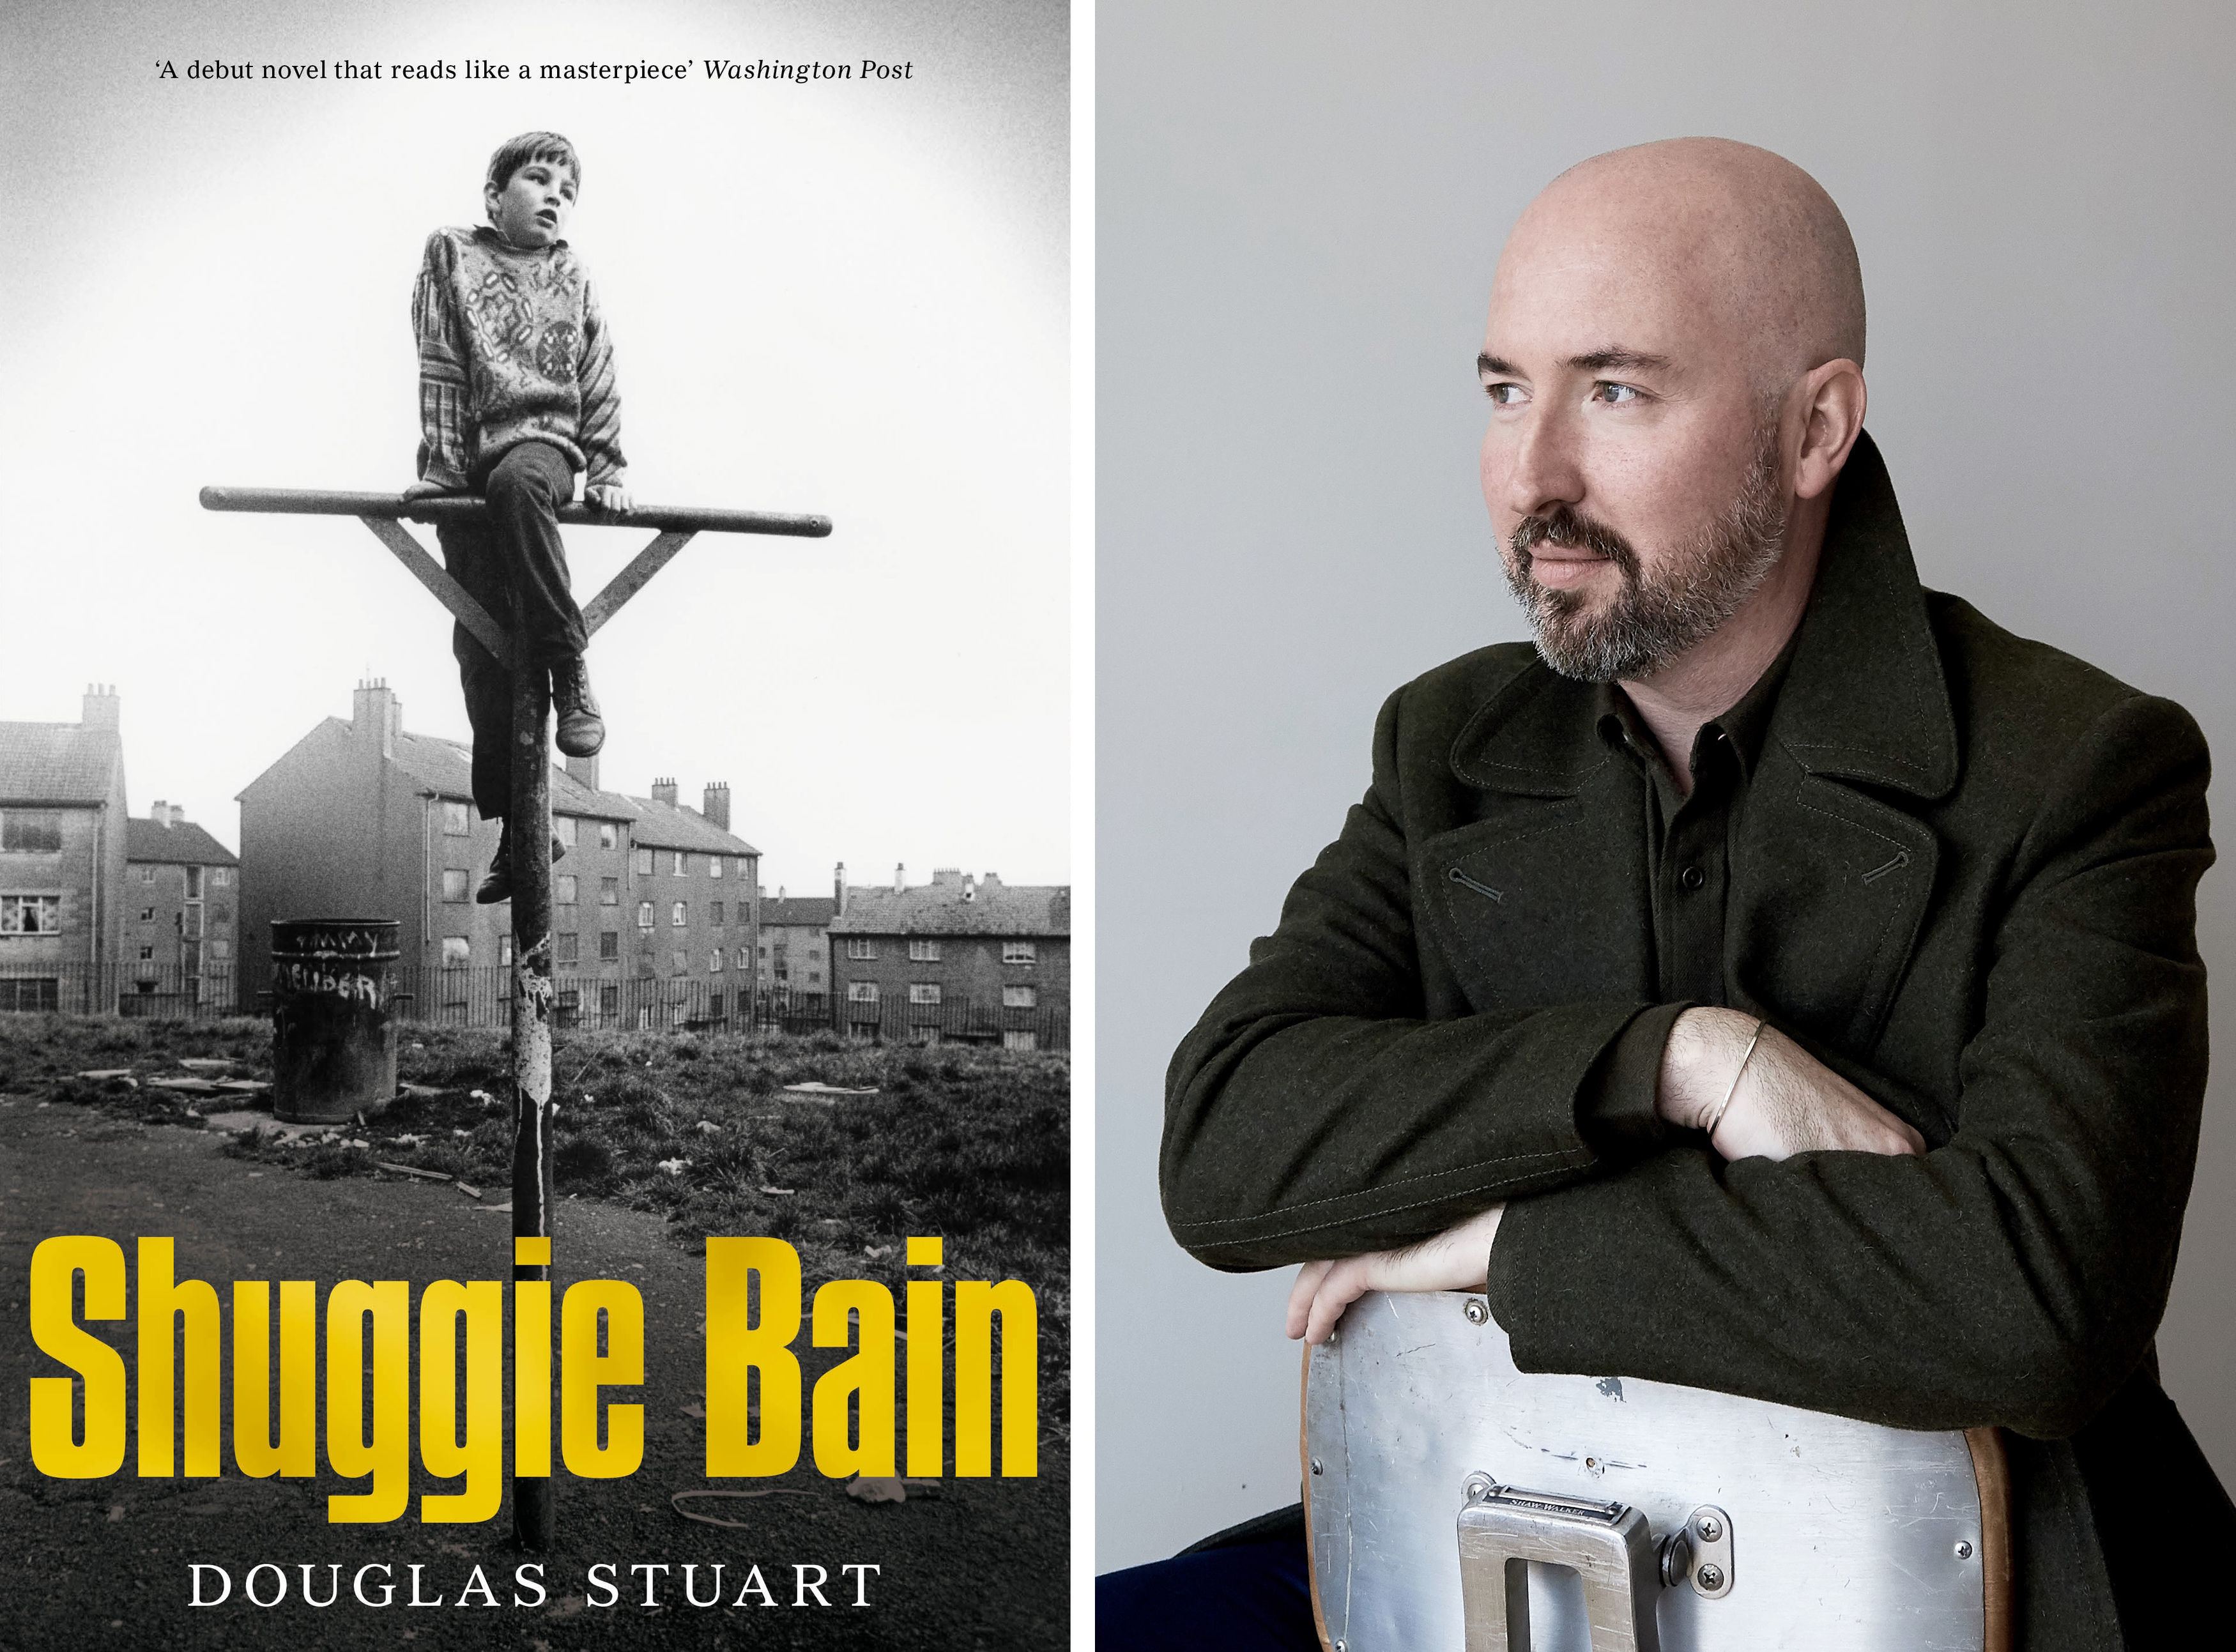 Douglas Stuart: From Sighthill to the 2020 Booker Prize win | NewsChain